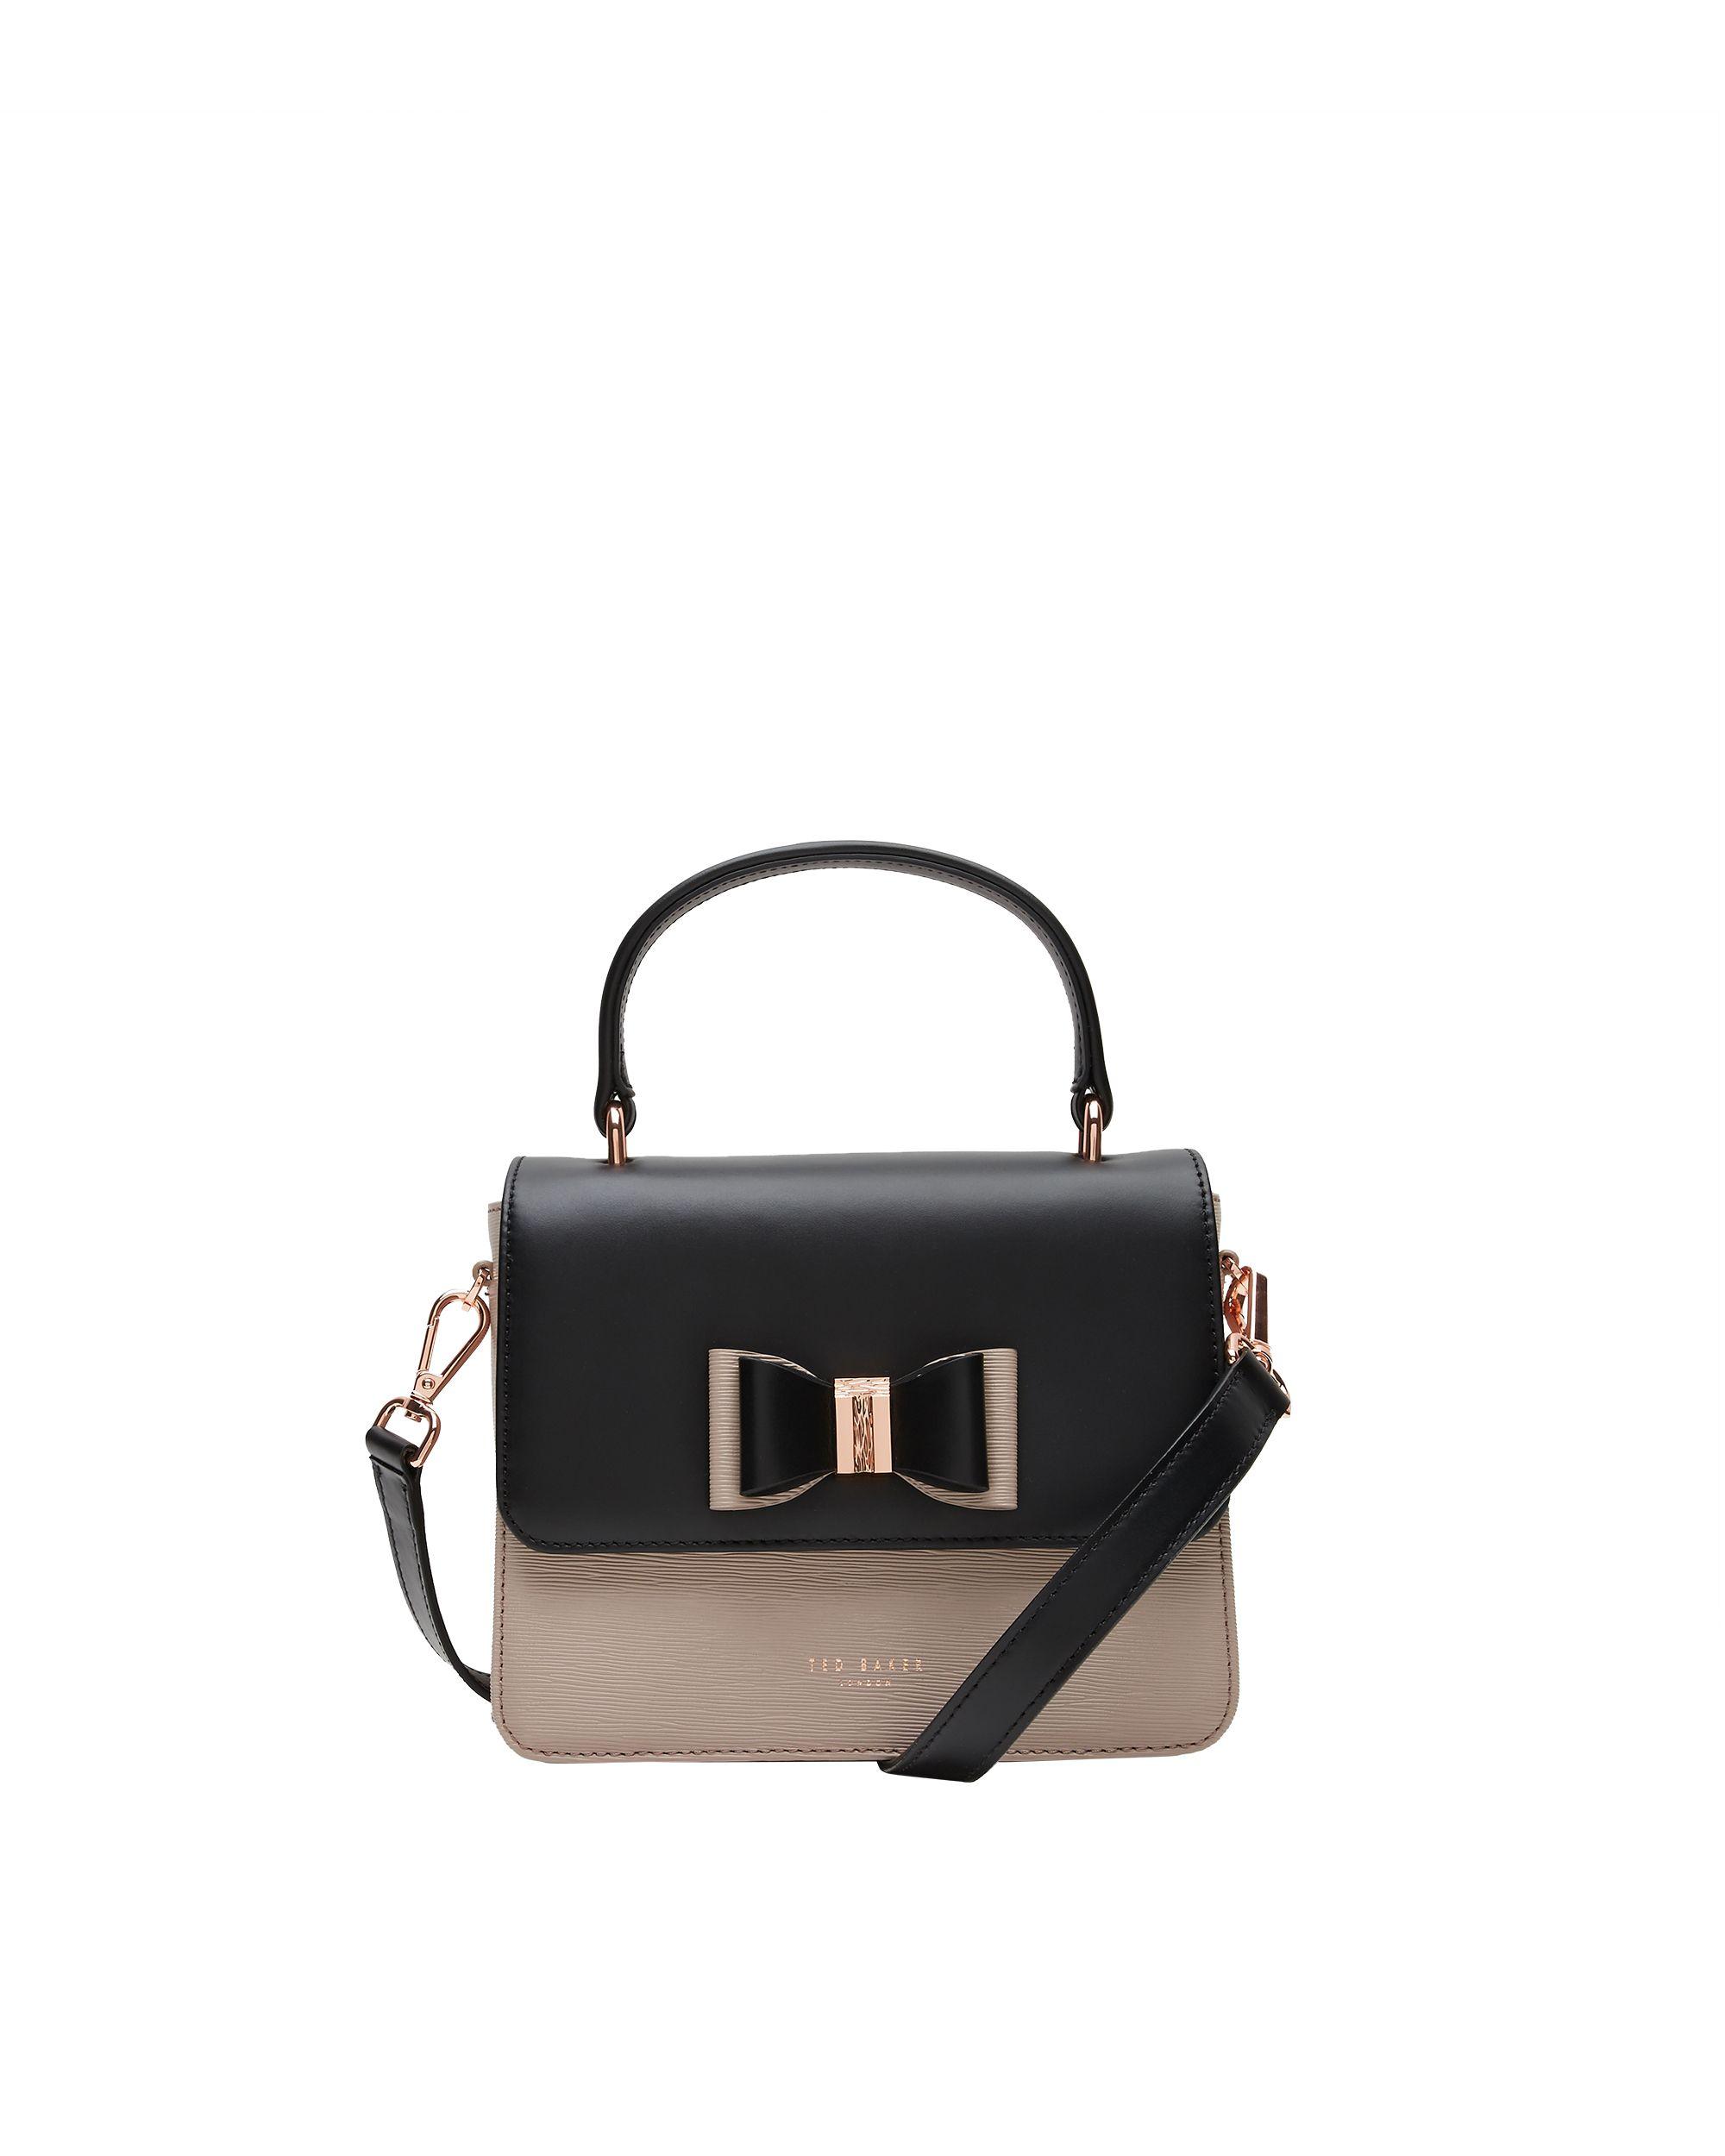 Ted baker Calila Bow Leather Cross Body Bag in Brown | Lyst